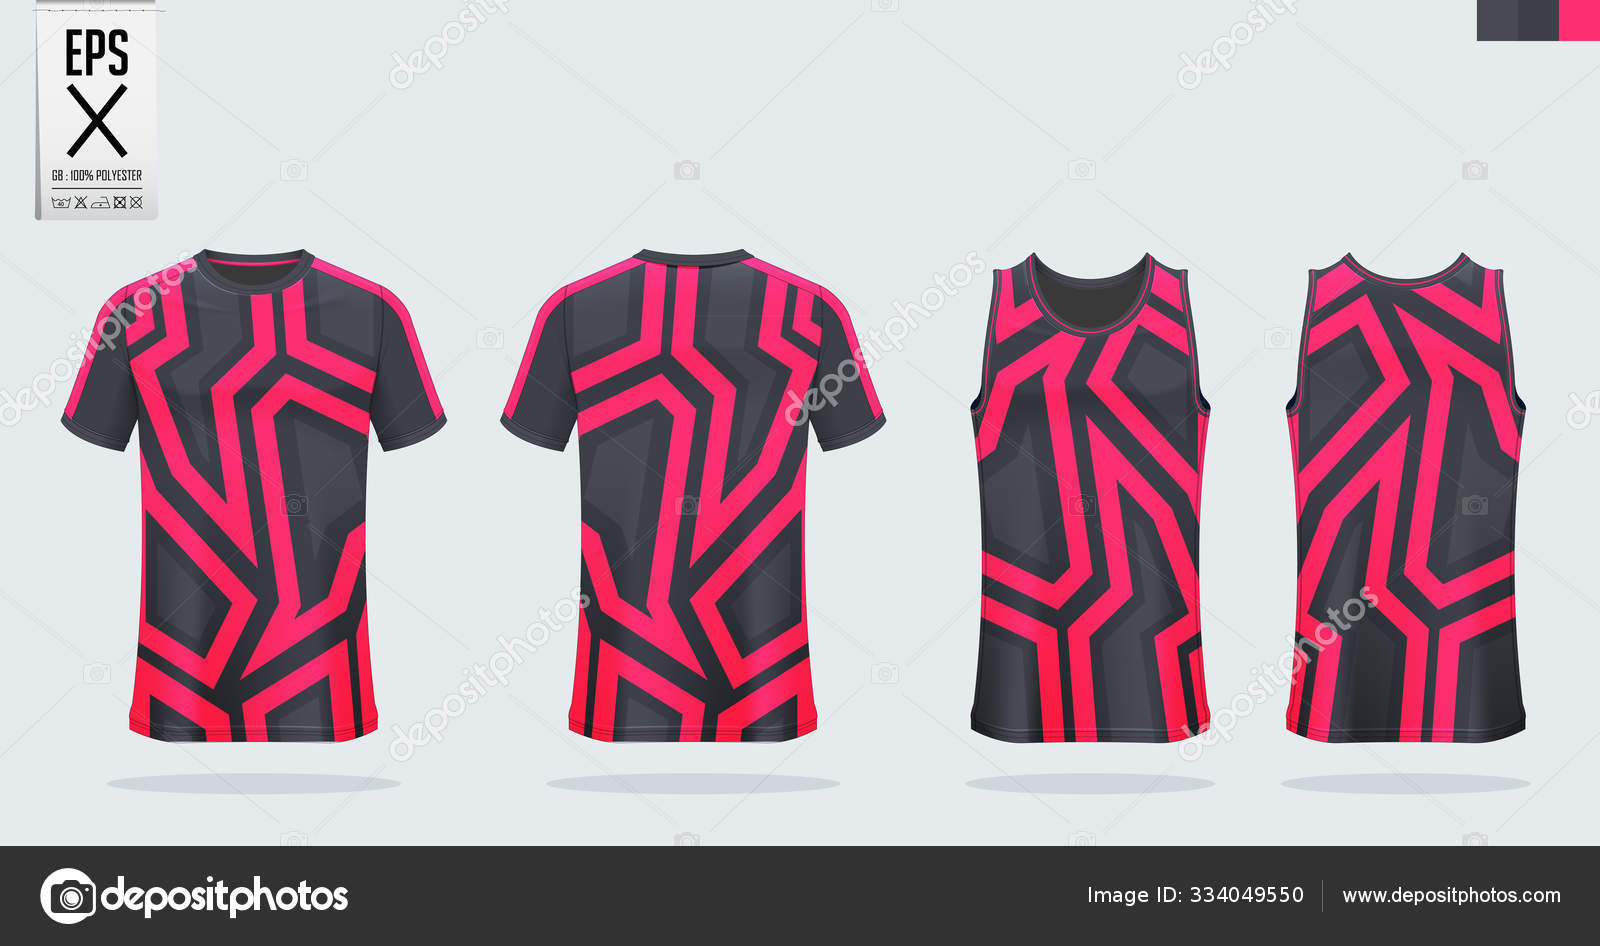 Download T Shirt Sport Mockup Template Design For Soccer Jersey Football Kit Tank Top For Basketball Jersey And Running Singlet Sport Uniform In Front View And Back View Vector Vector Image By C